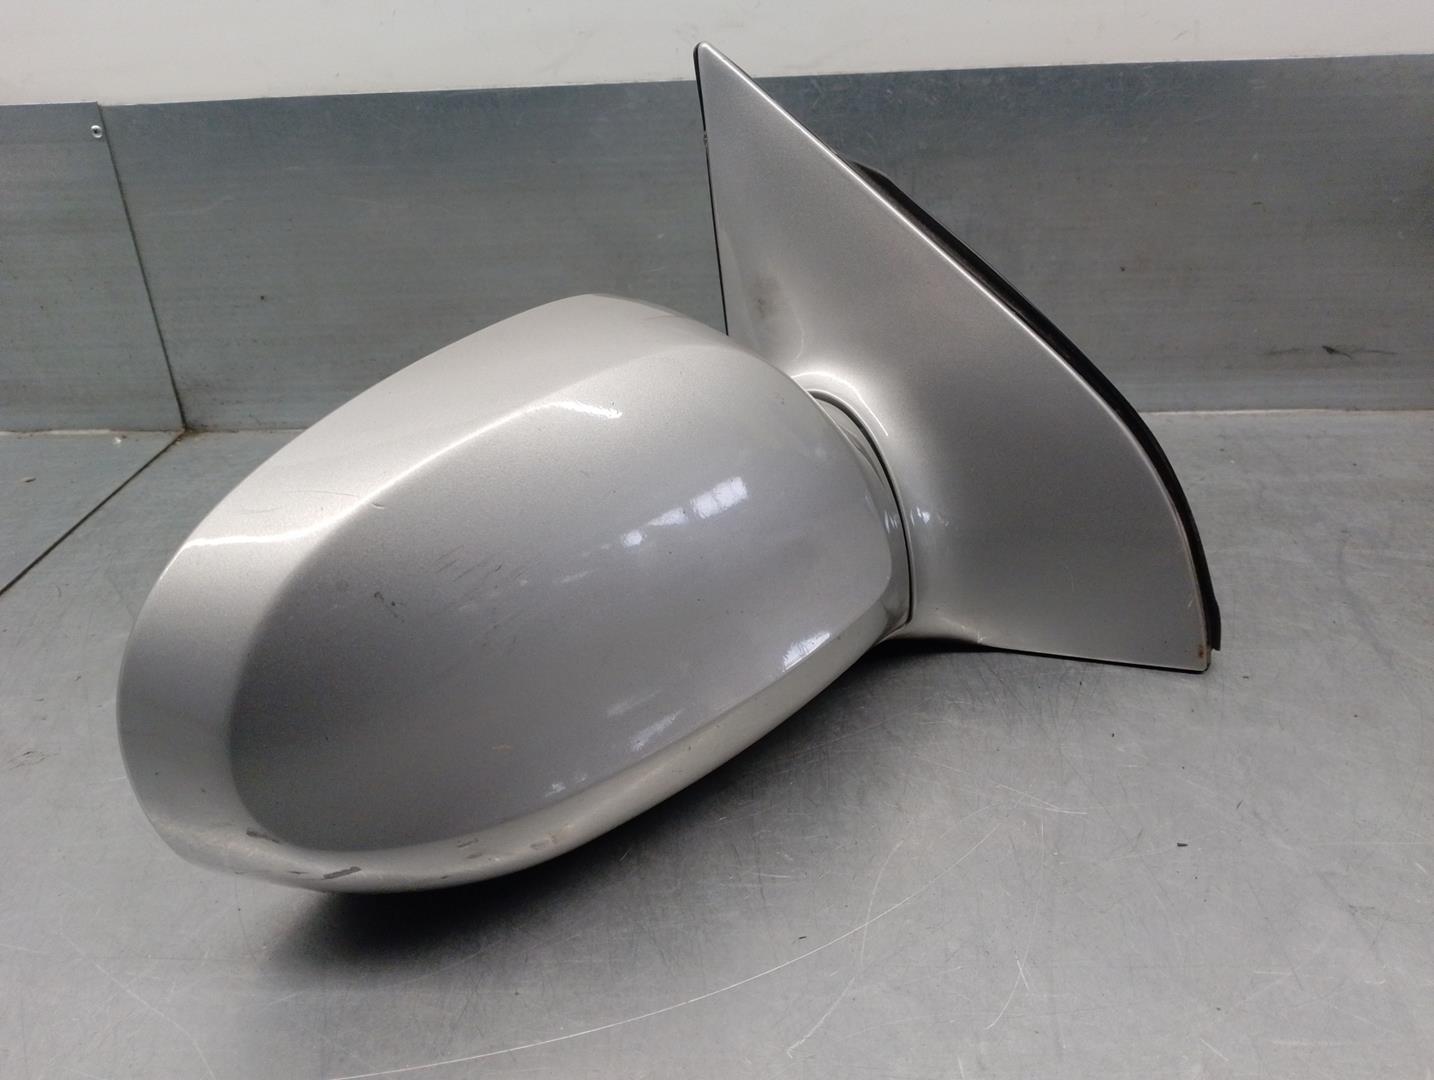 KIA Carnival UP/GQ (1999-2006) Right Side Wing Mirror 0K54E69123, 7PINES, 5PUERTAS 24209551